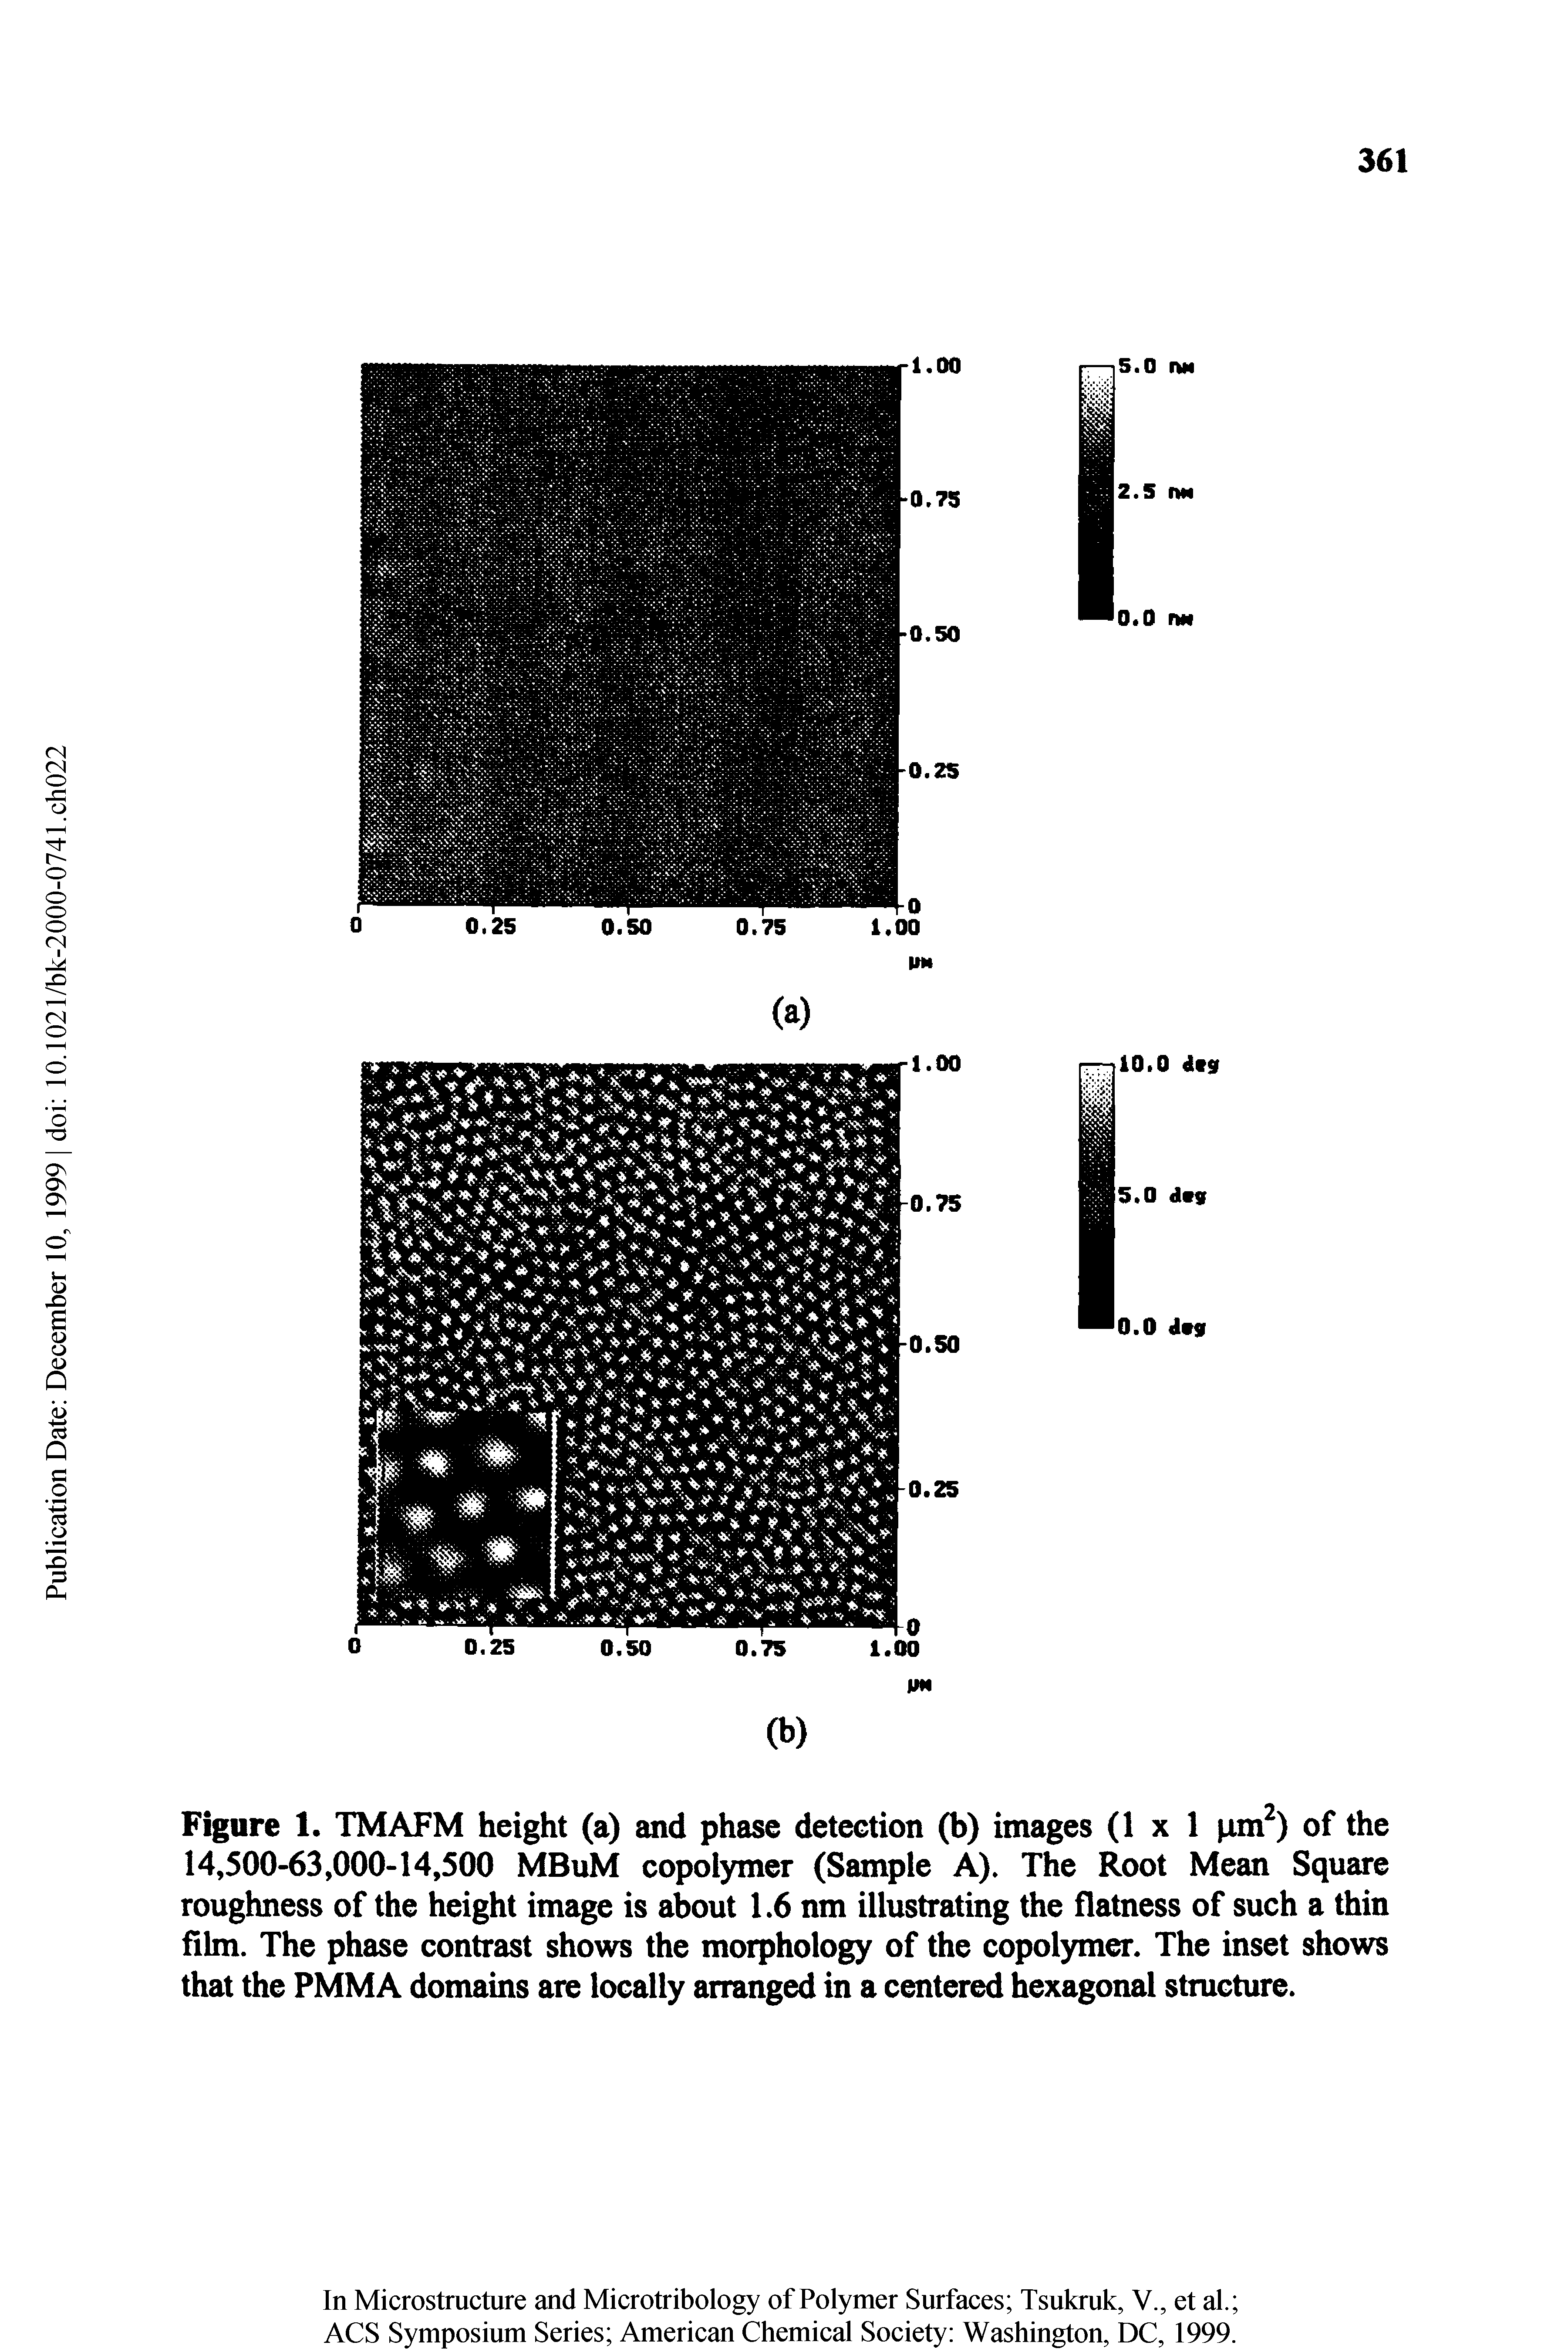 Figure 1. TMAFM height (a) and phase detection (b) images (1x1 pm ) of the 14,500-63,000-14,500 MBuM copolymer (Sample A). The Root Mean Square roughness of the height image is about 1.6 nm illustrating the flatness of such a thin film. The phase contrast shows the morphology of the copolymer. The inset shows that the PMMA domains are locally arranged in a centered hexagonal structure.